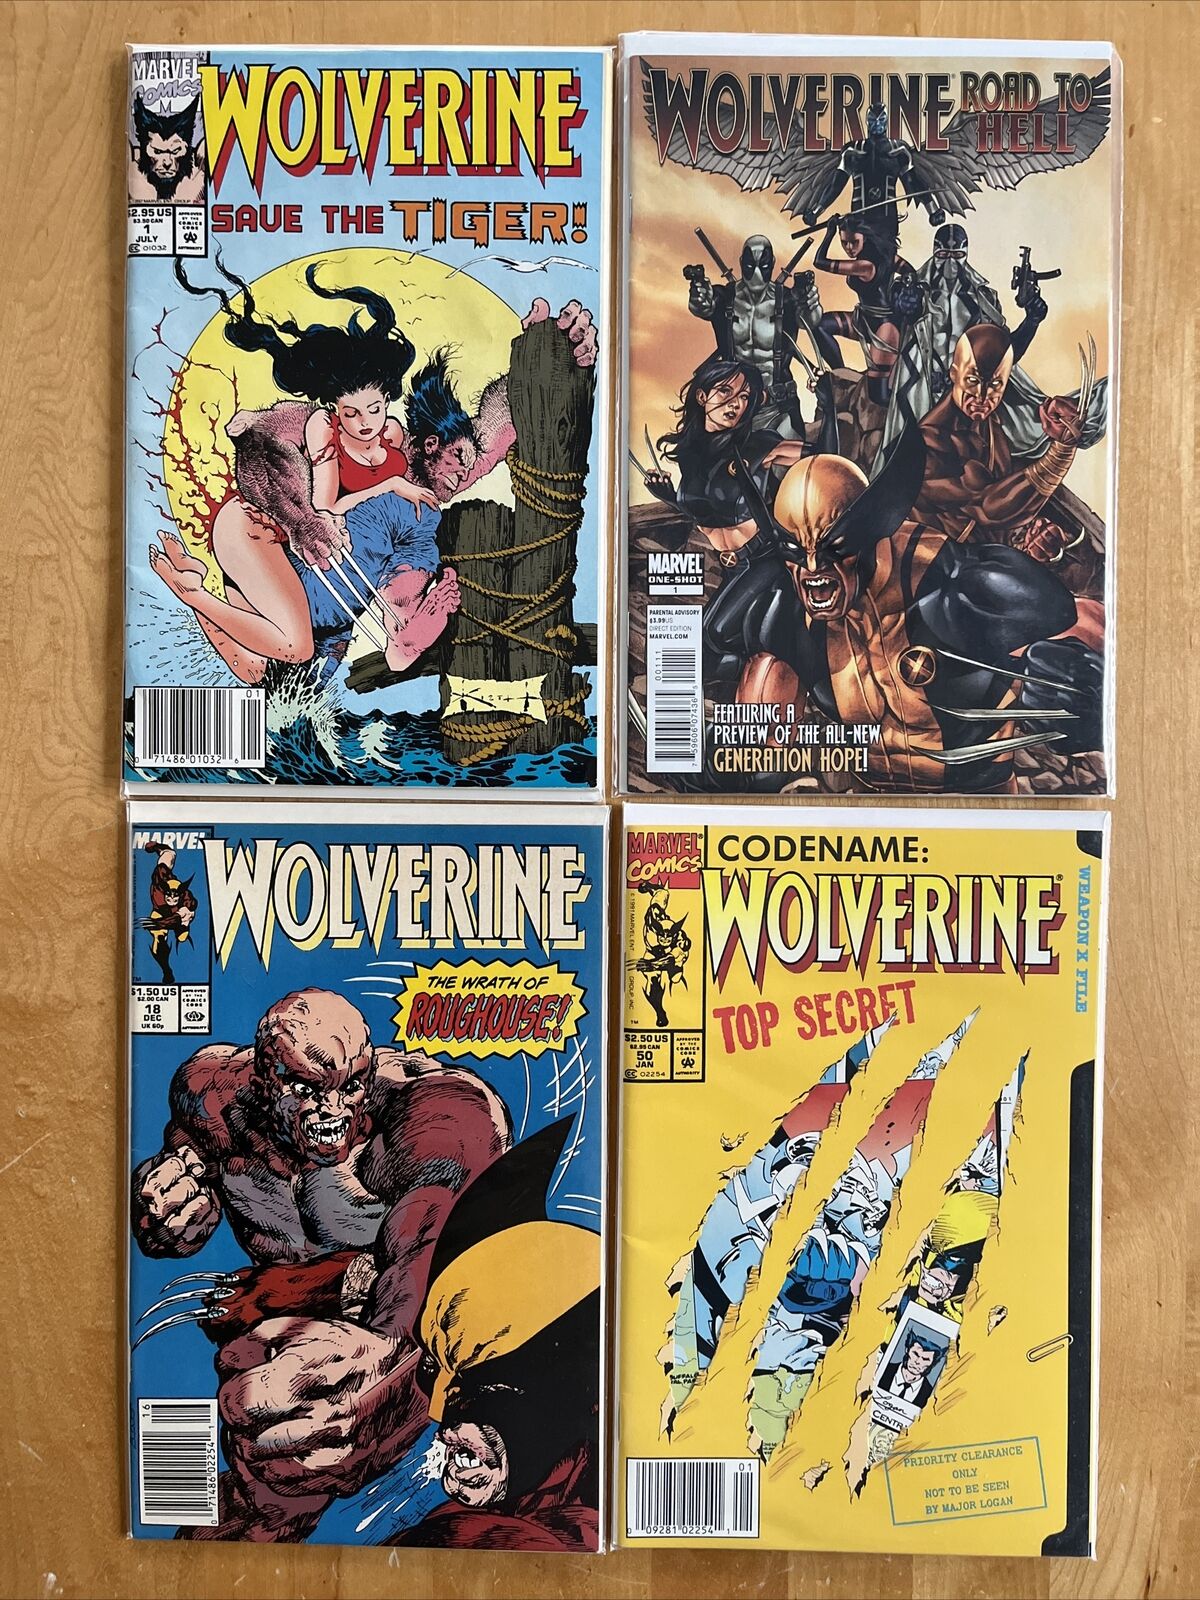 WOLVERINE #18 50 SAVE THE TIGER #1 ROAD TO HELL #1 (MARVEL) NICE LOT